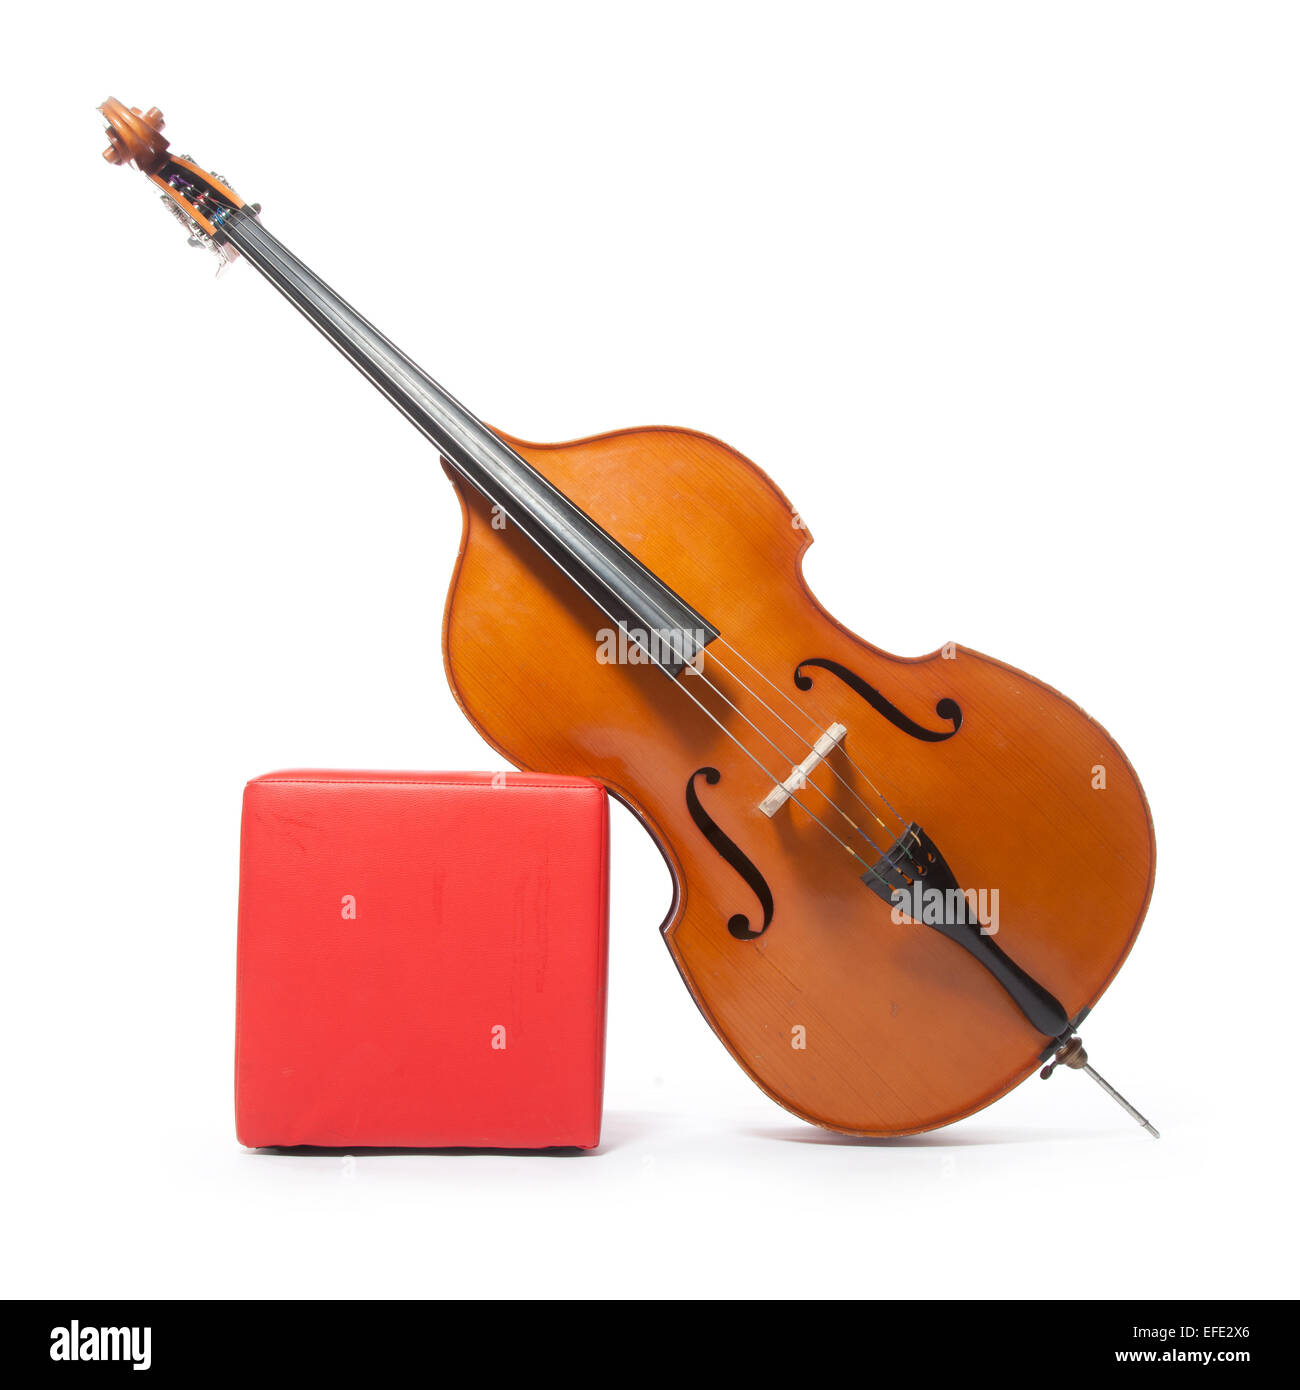 double bass leans against red box in studio with white background Stock Photo